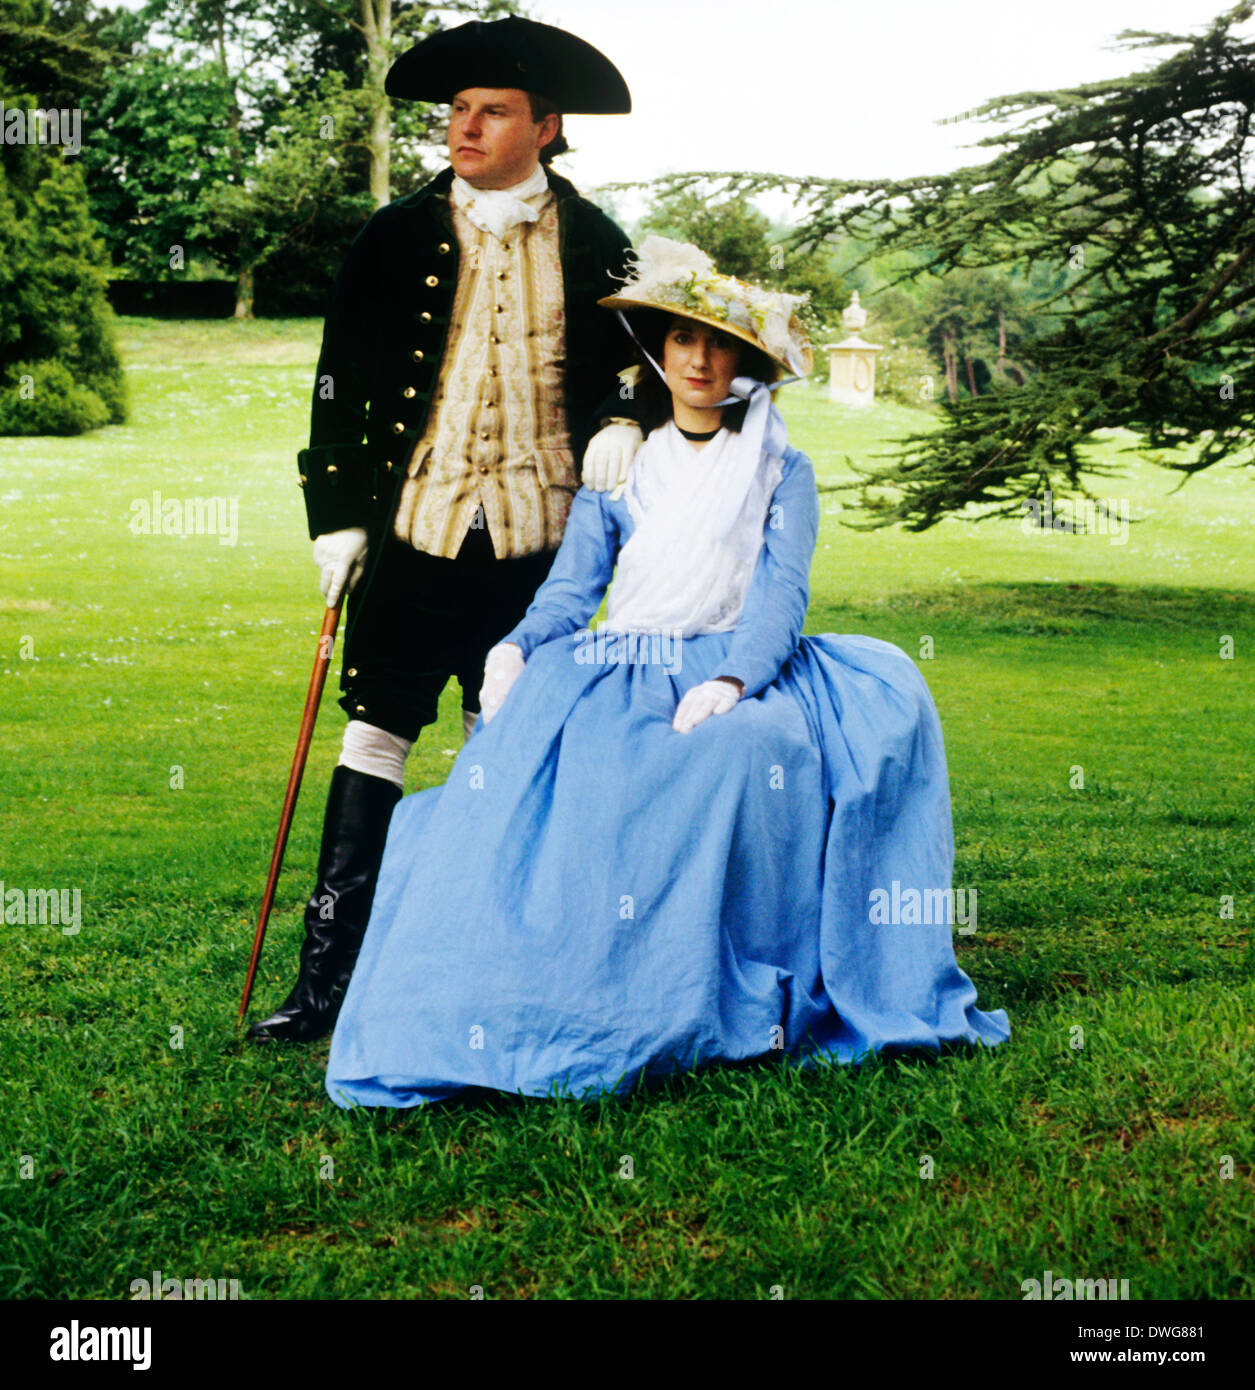 18th Century English Gentry in landscaped parkland, Audley End House gardens, Essex England UK, historical re-enactment costume costumes fashion fashions gentleman and lady Stock Photo